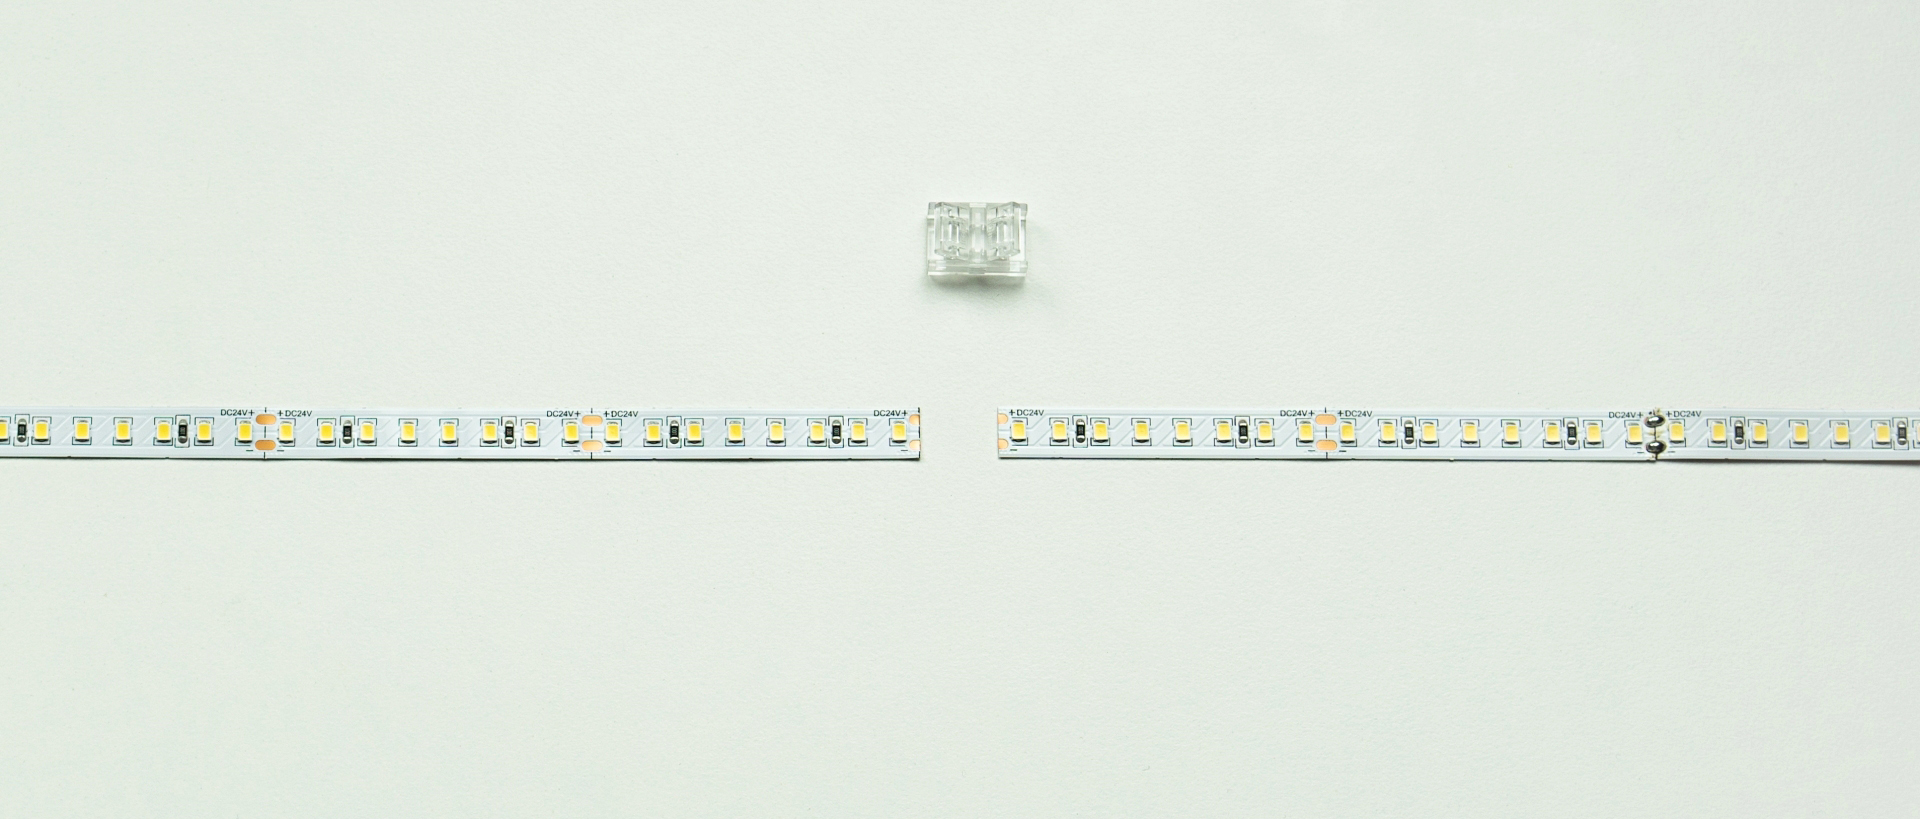 Connection diagram of LED strips using a single-sided connector